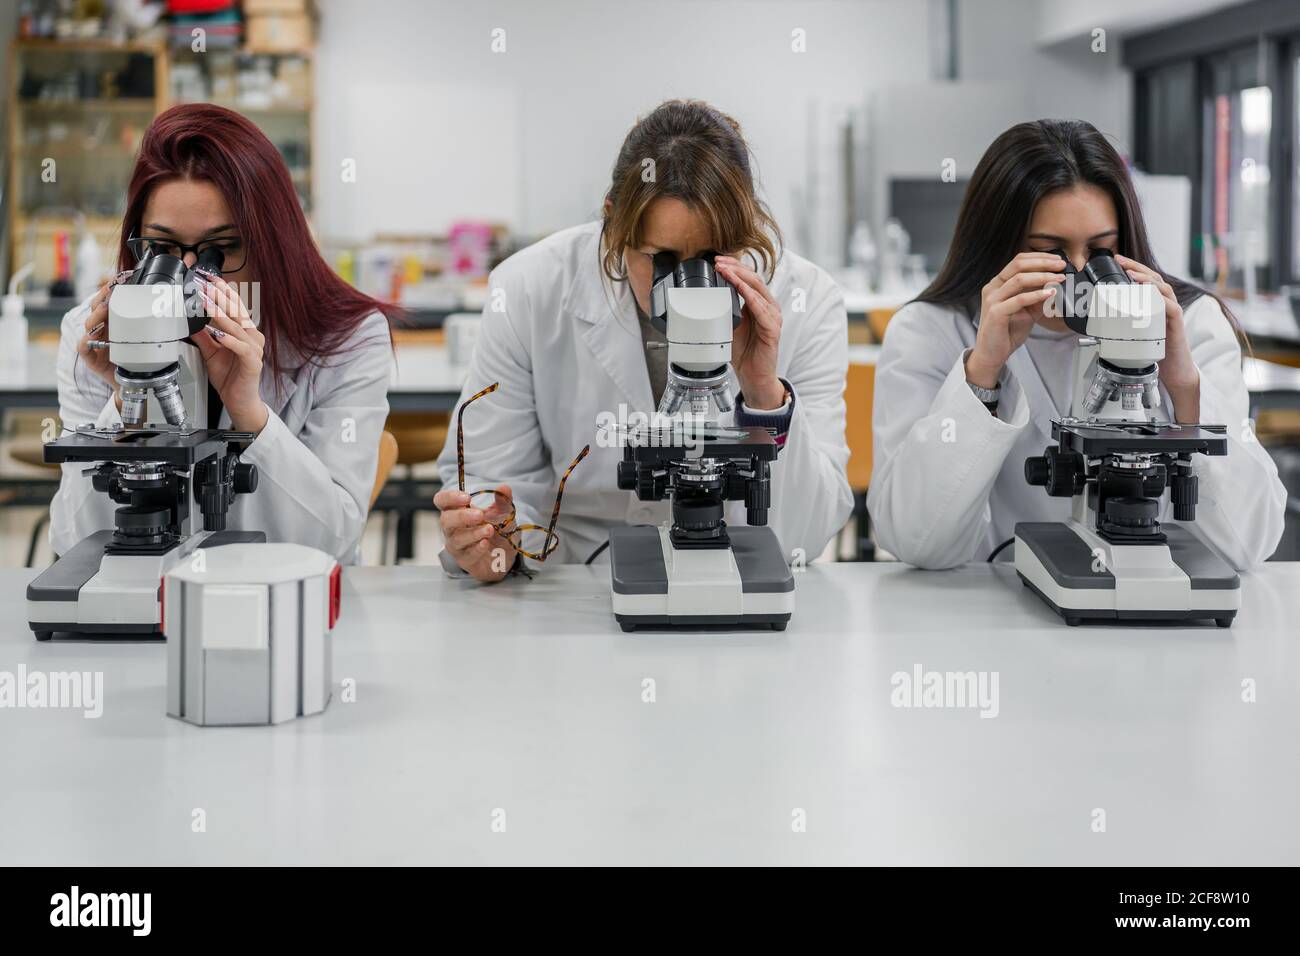 Women in white coats using modern microscopes to examine tissue cells during work in laboratory Stock Photo